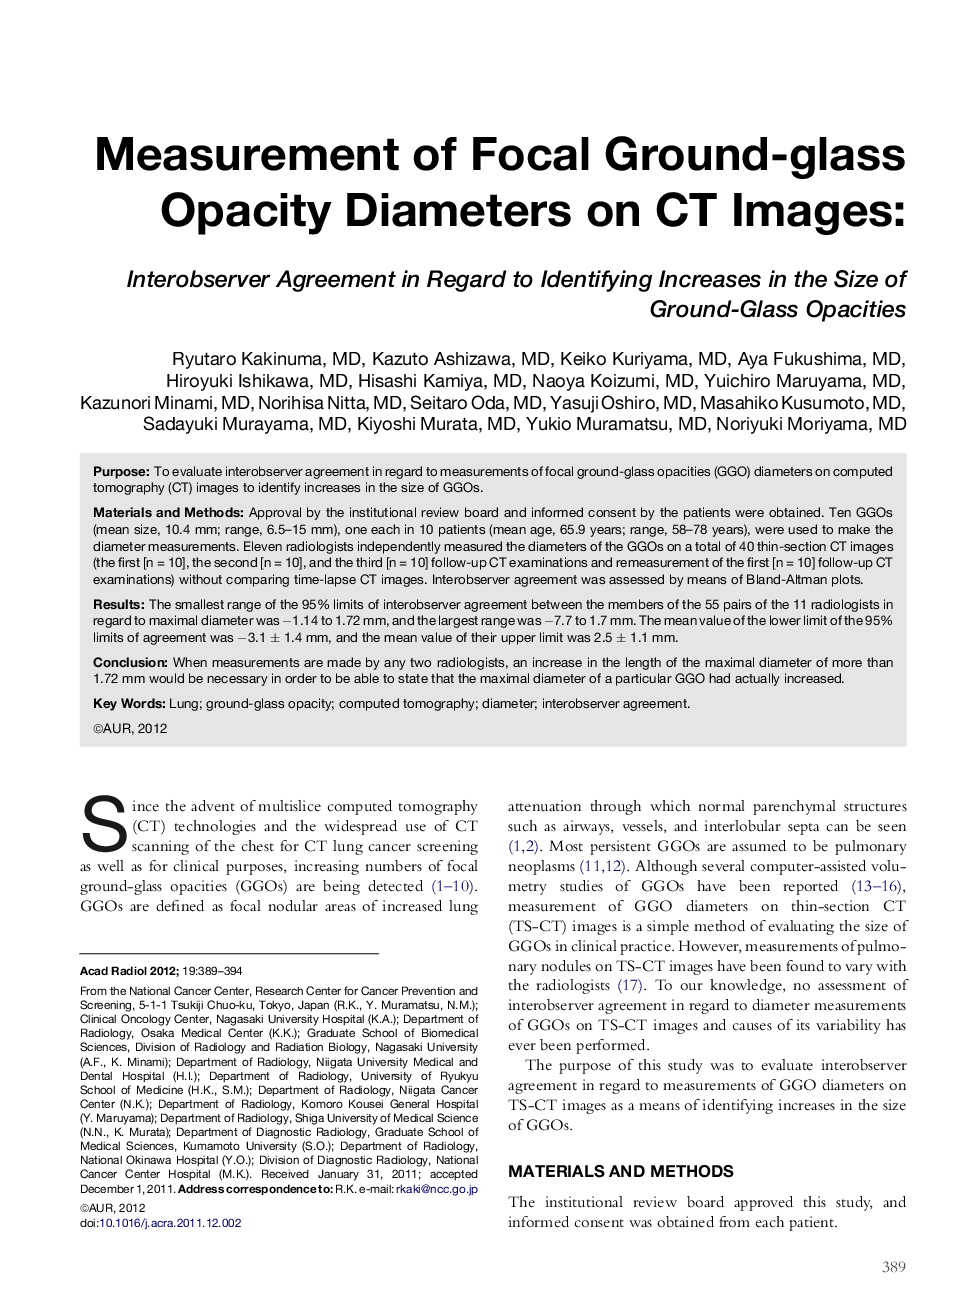 Measurement of Focal Ground-glass Opacity Diameters on CT Images